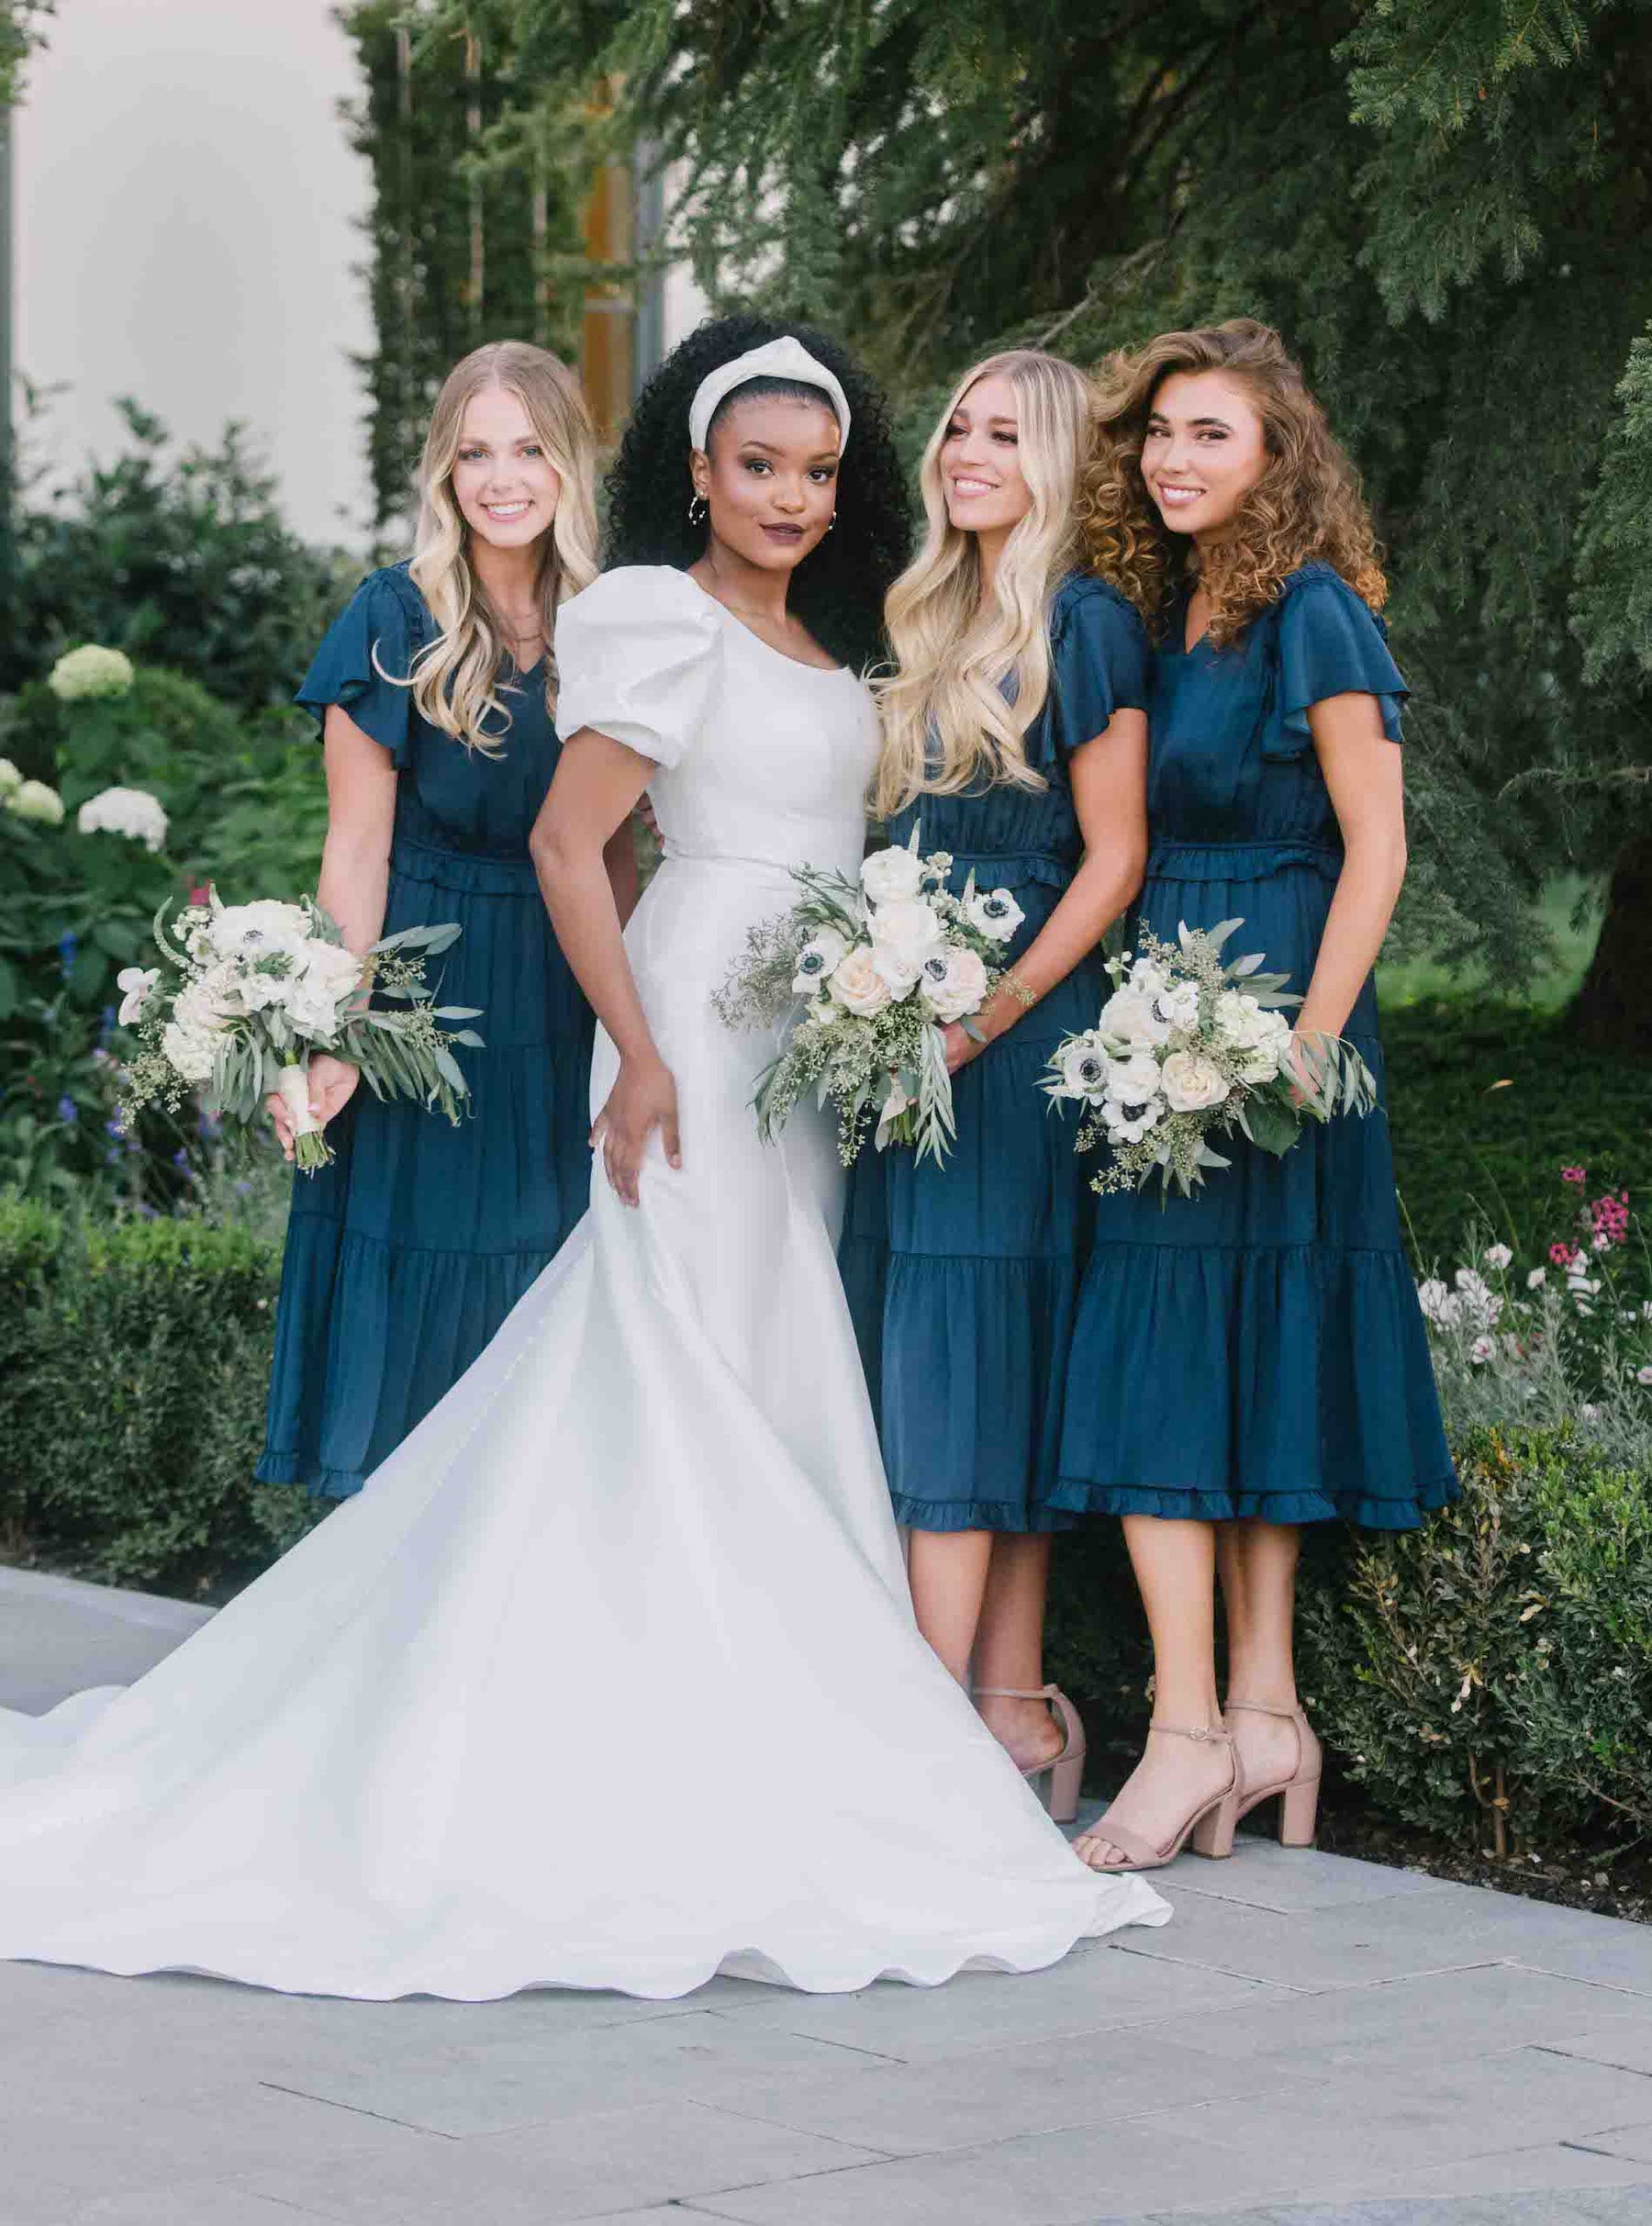 Bride wearing a mikado modest wedding dress with large pouf sleeves. She has three bridesmaids gathered around her all wearing the same navy modest bridesmaid dress from moment made shop.